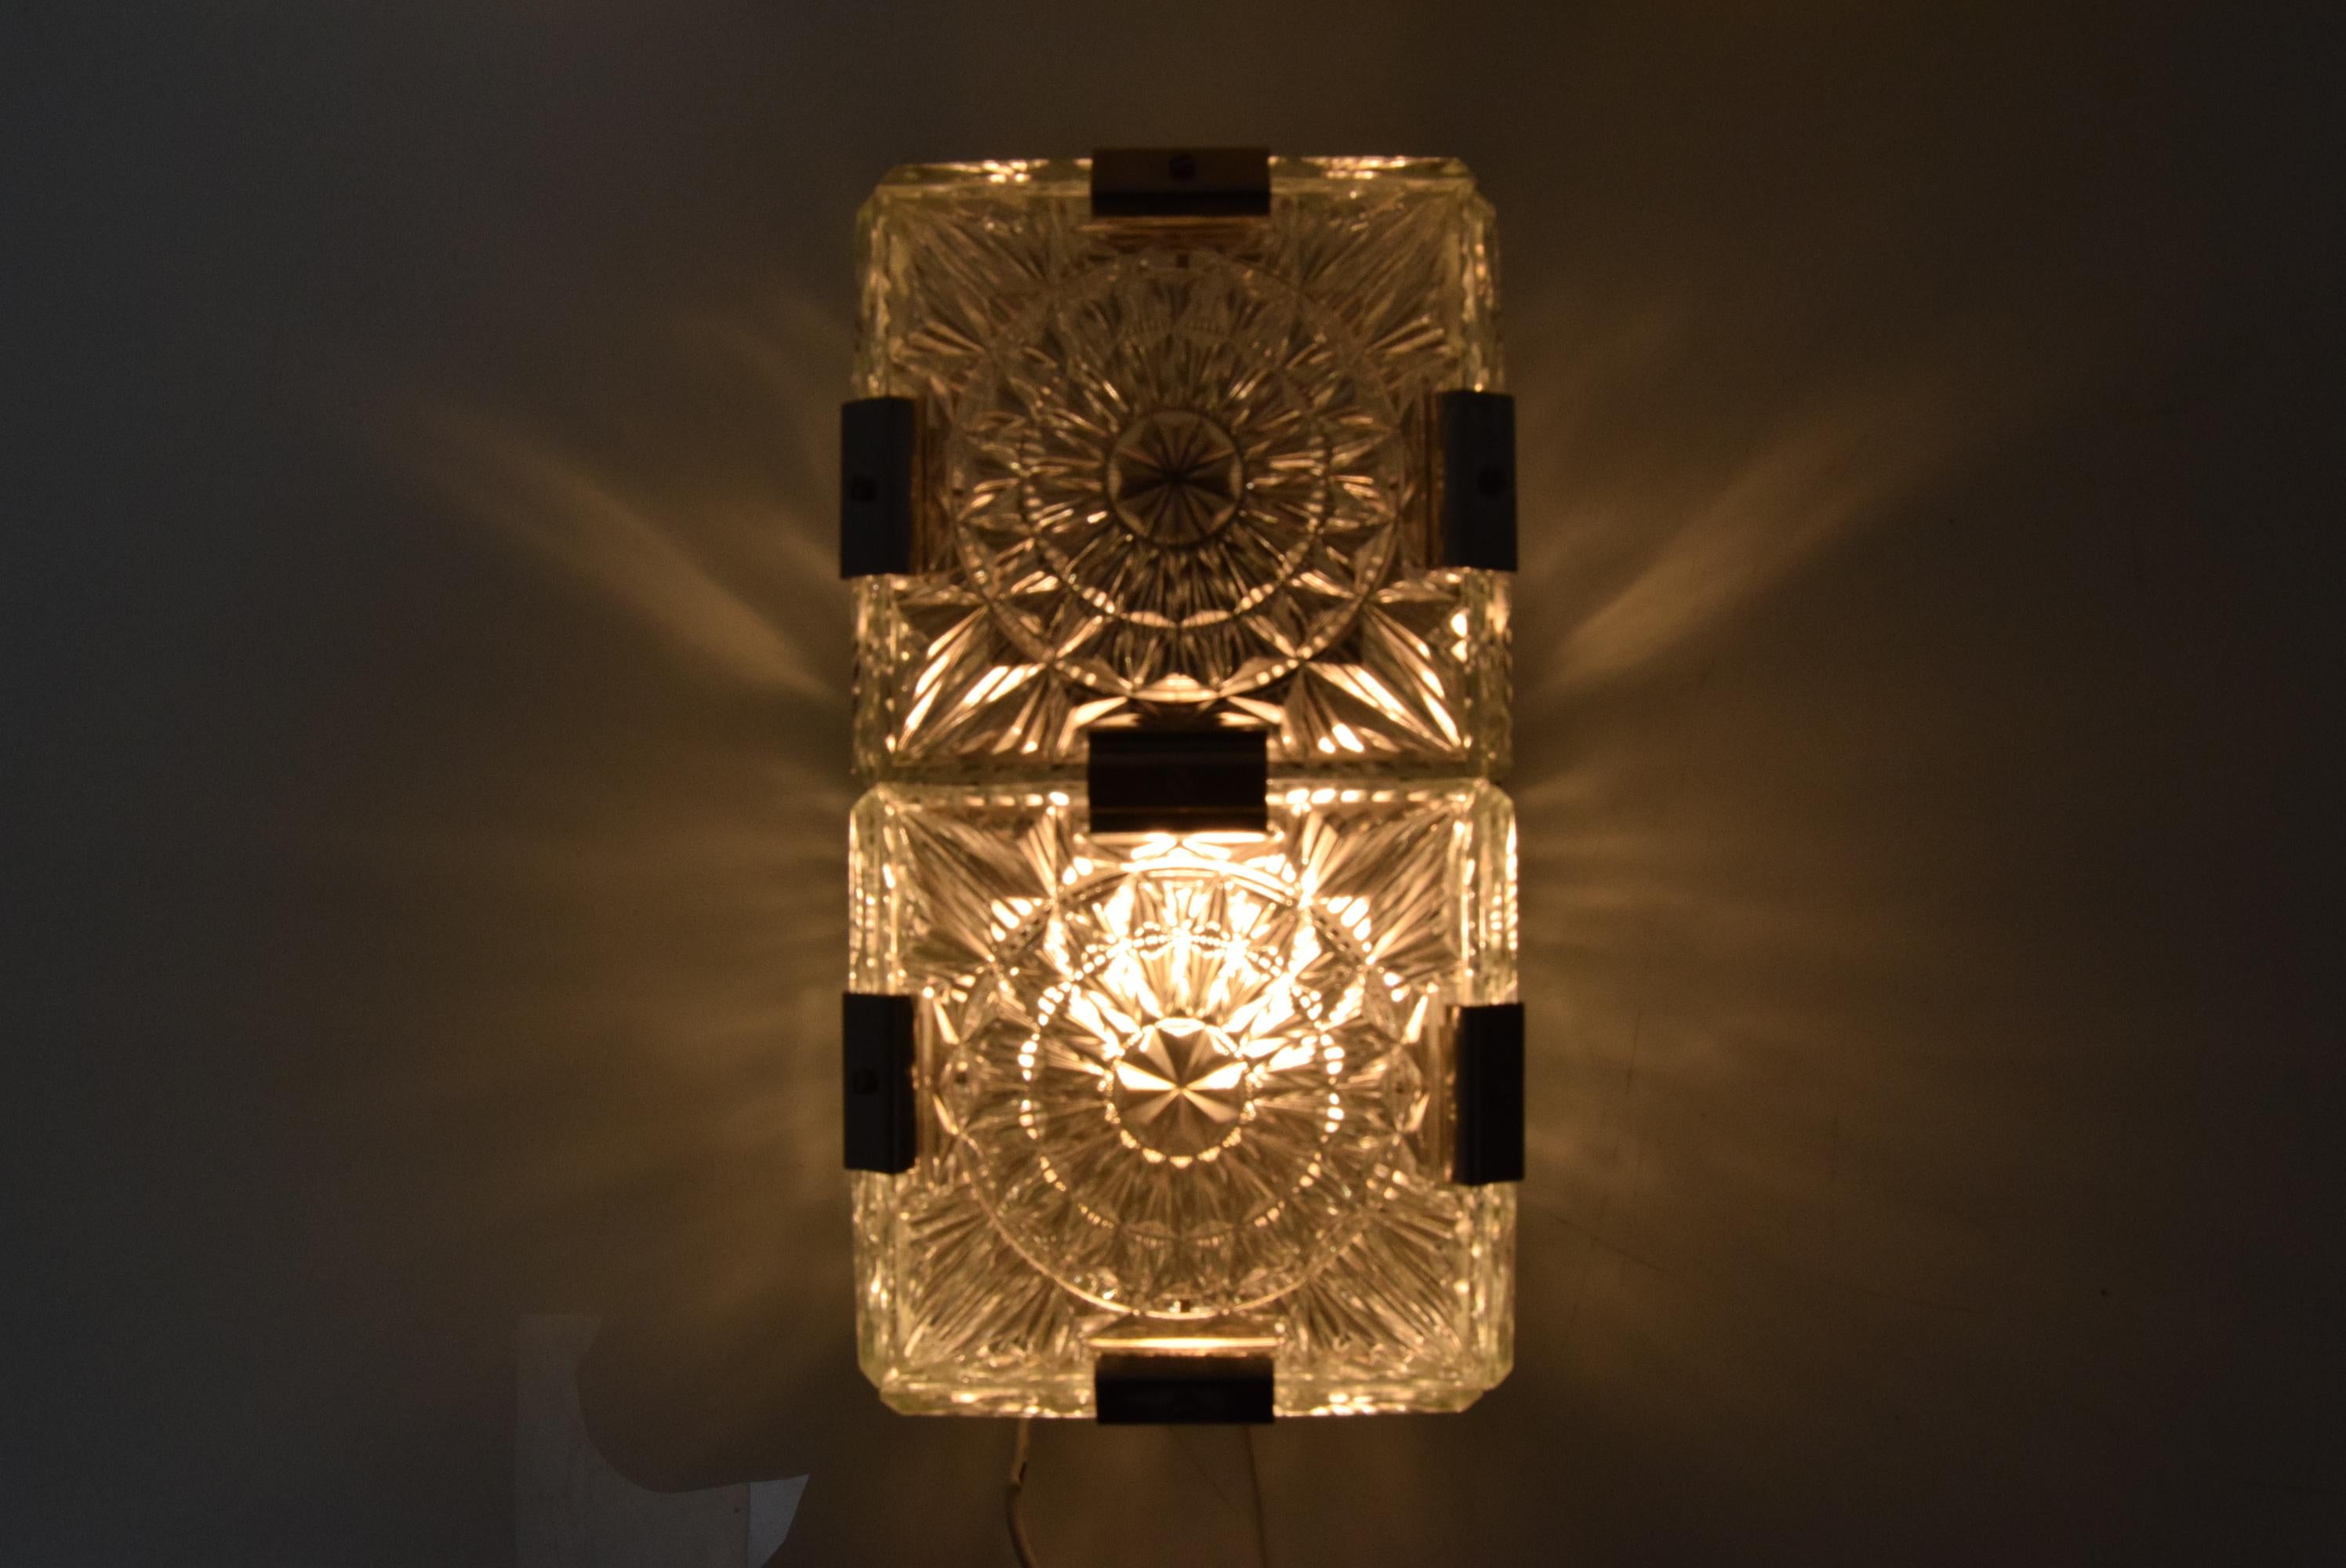 Senov,Czechoslovakia,1960's.
Made of 
Pressed glass,Metal
The lamp was completely disassembled and cleaned
was fitted with a new electrical installation
1x60w,E27 or E26 bulb
US adapter included
Good condition

